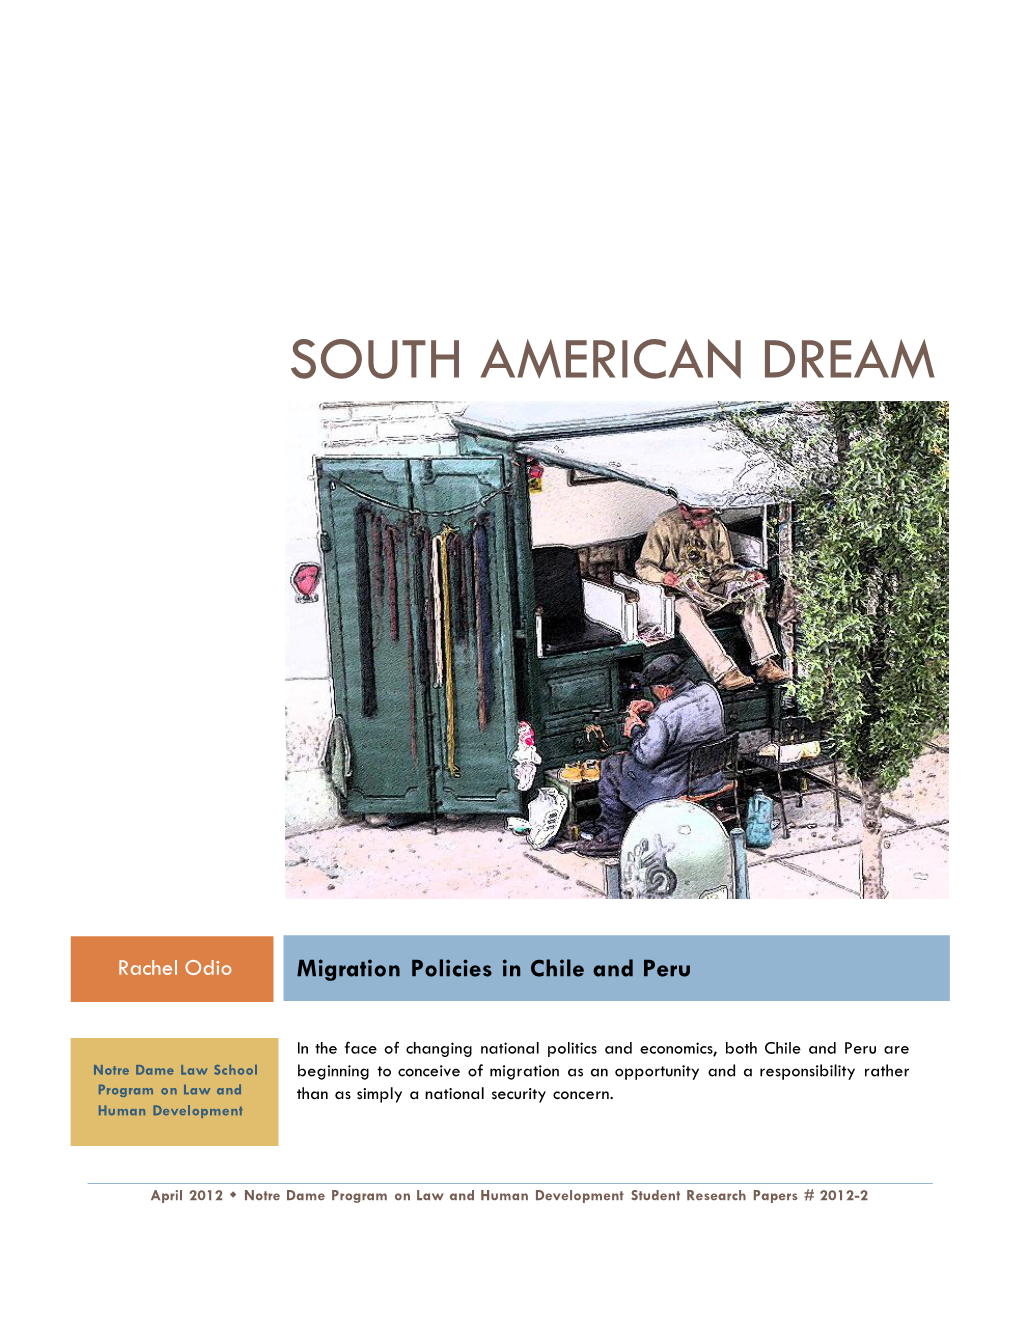 South American Dream: Migration Policies in Chile and Peru